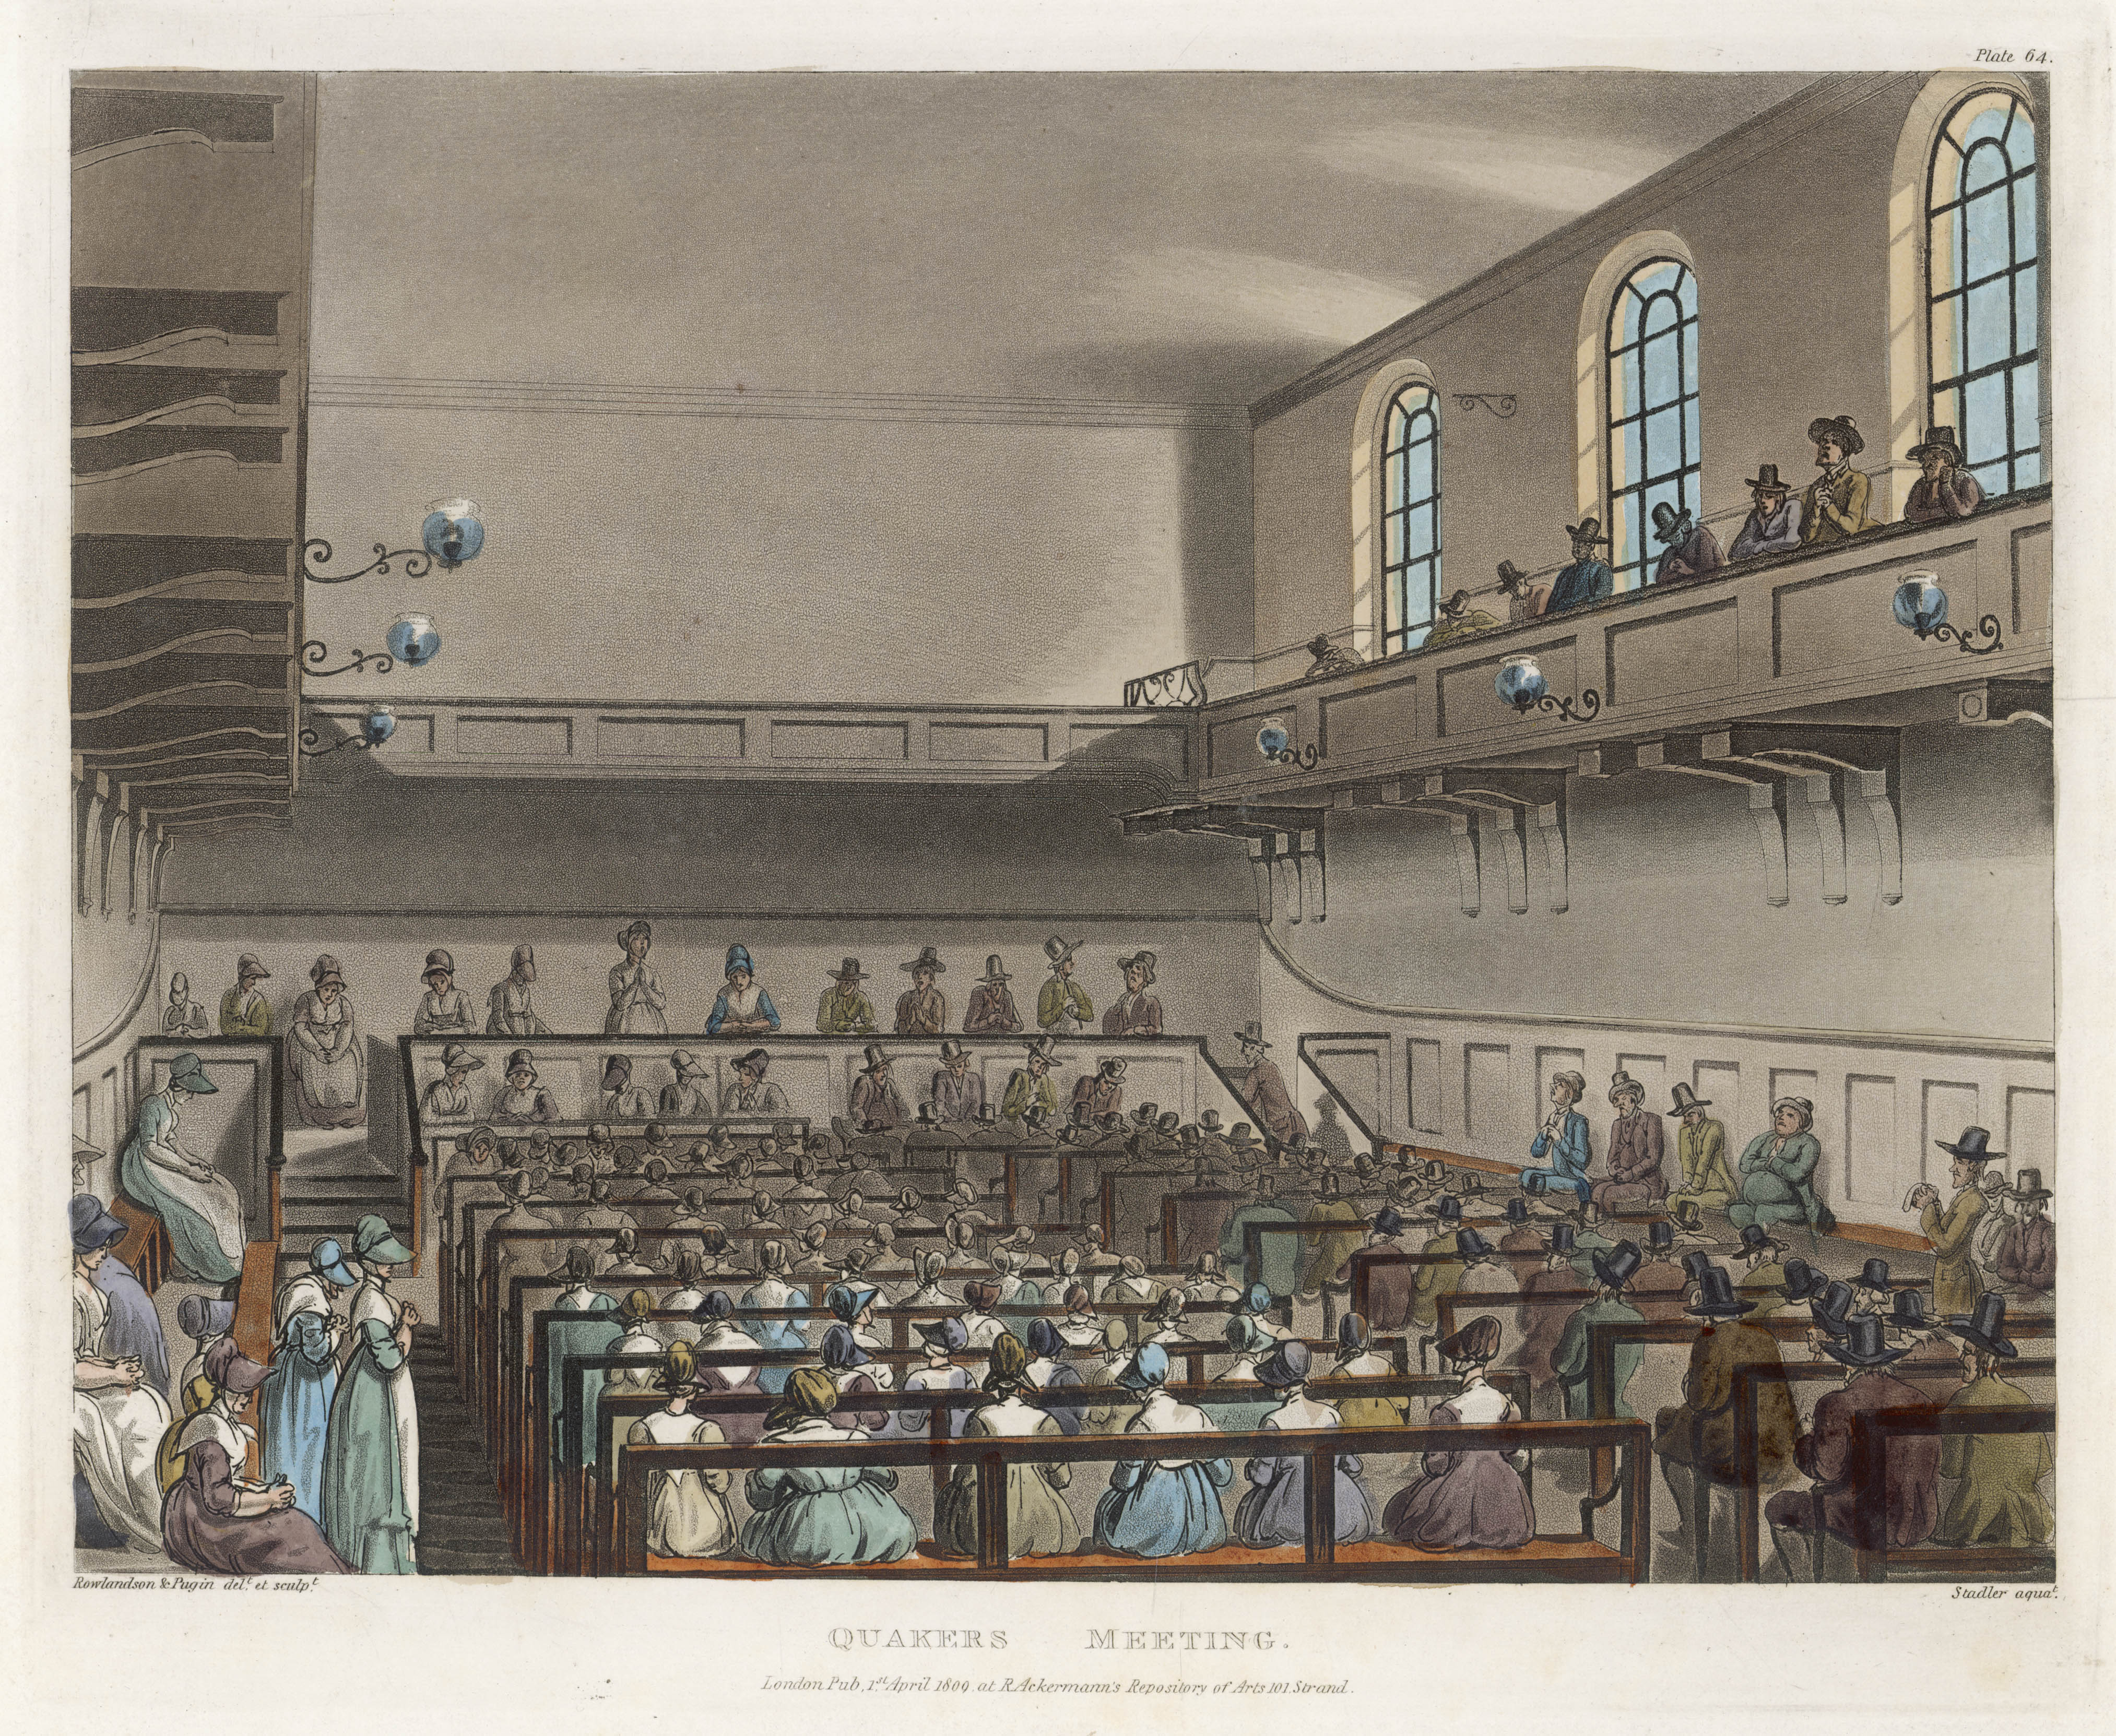 A Quakers Meeting in a London meeting-house : the men and women are seated separately, the women wearing their bonnets, the men their hats. Date: 1809